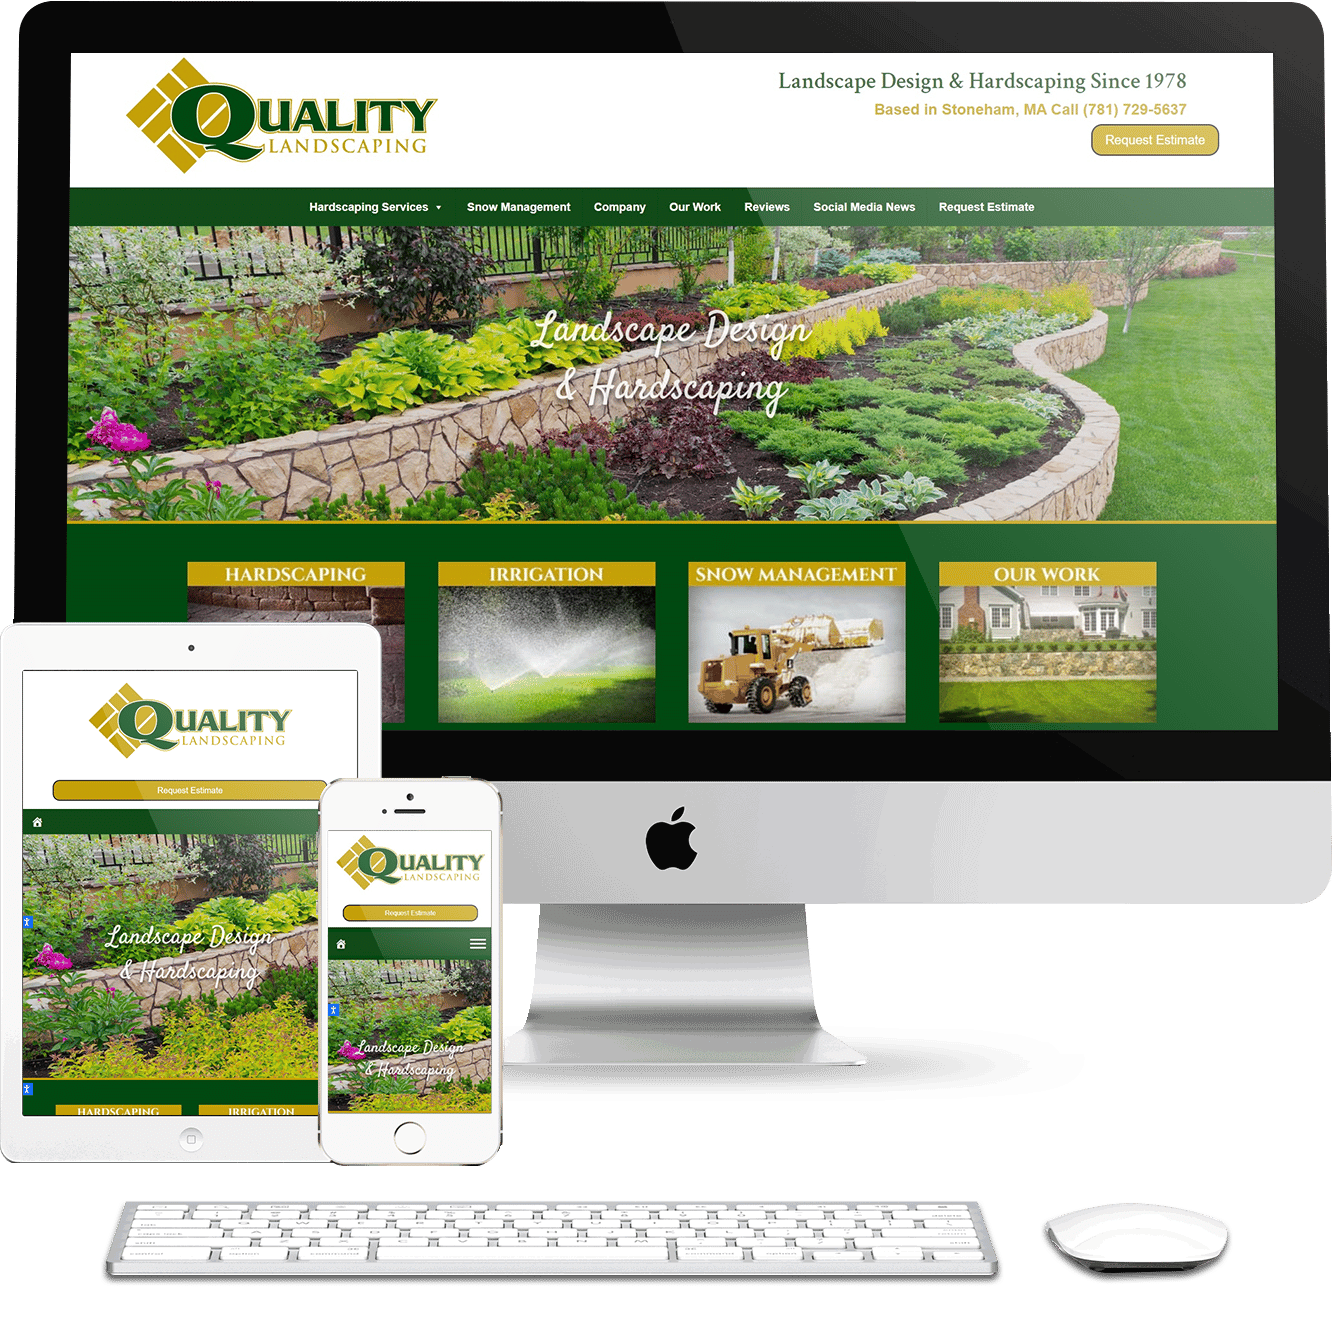 Quality Landscaping, Inc.